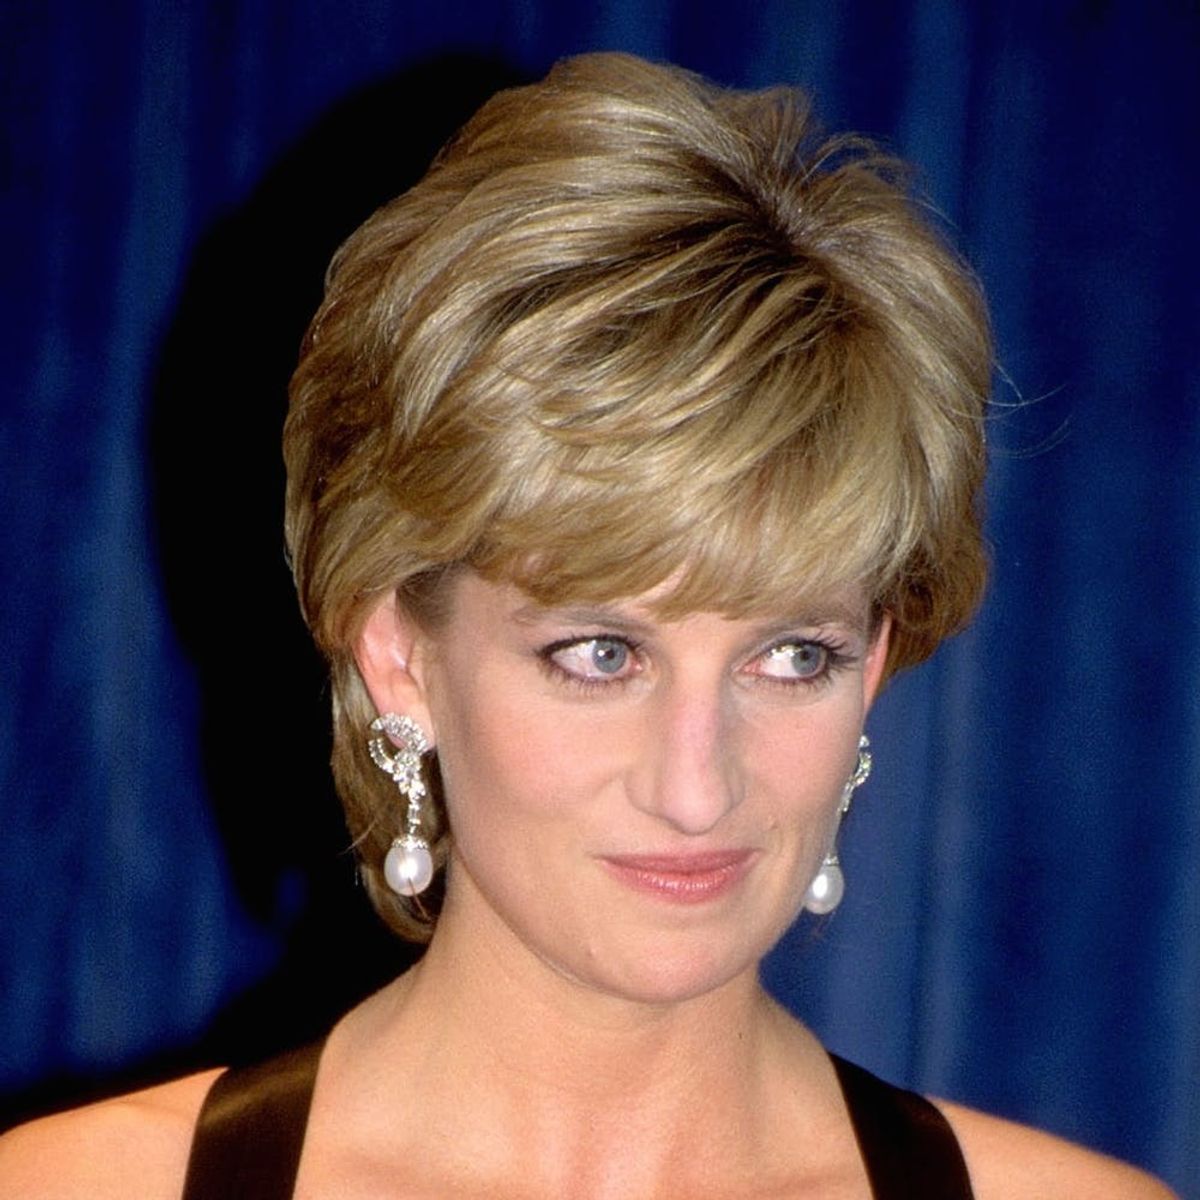 A Princess Diana Statue Is Coming to Kensington Palace Thanks to Princes William and Harry